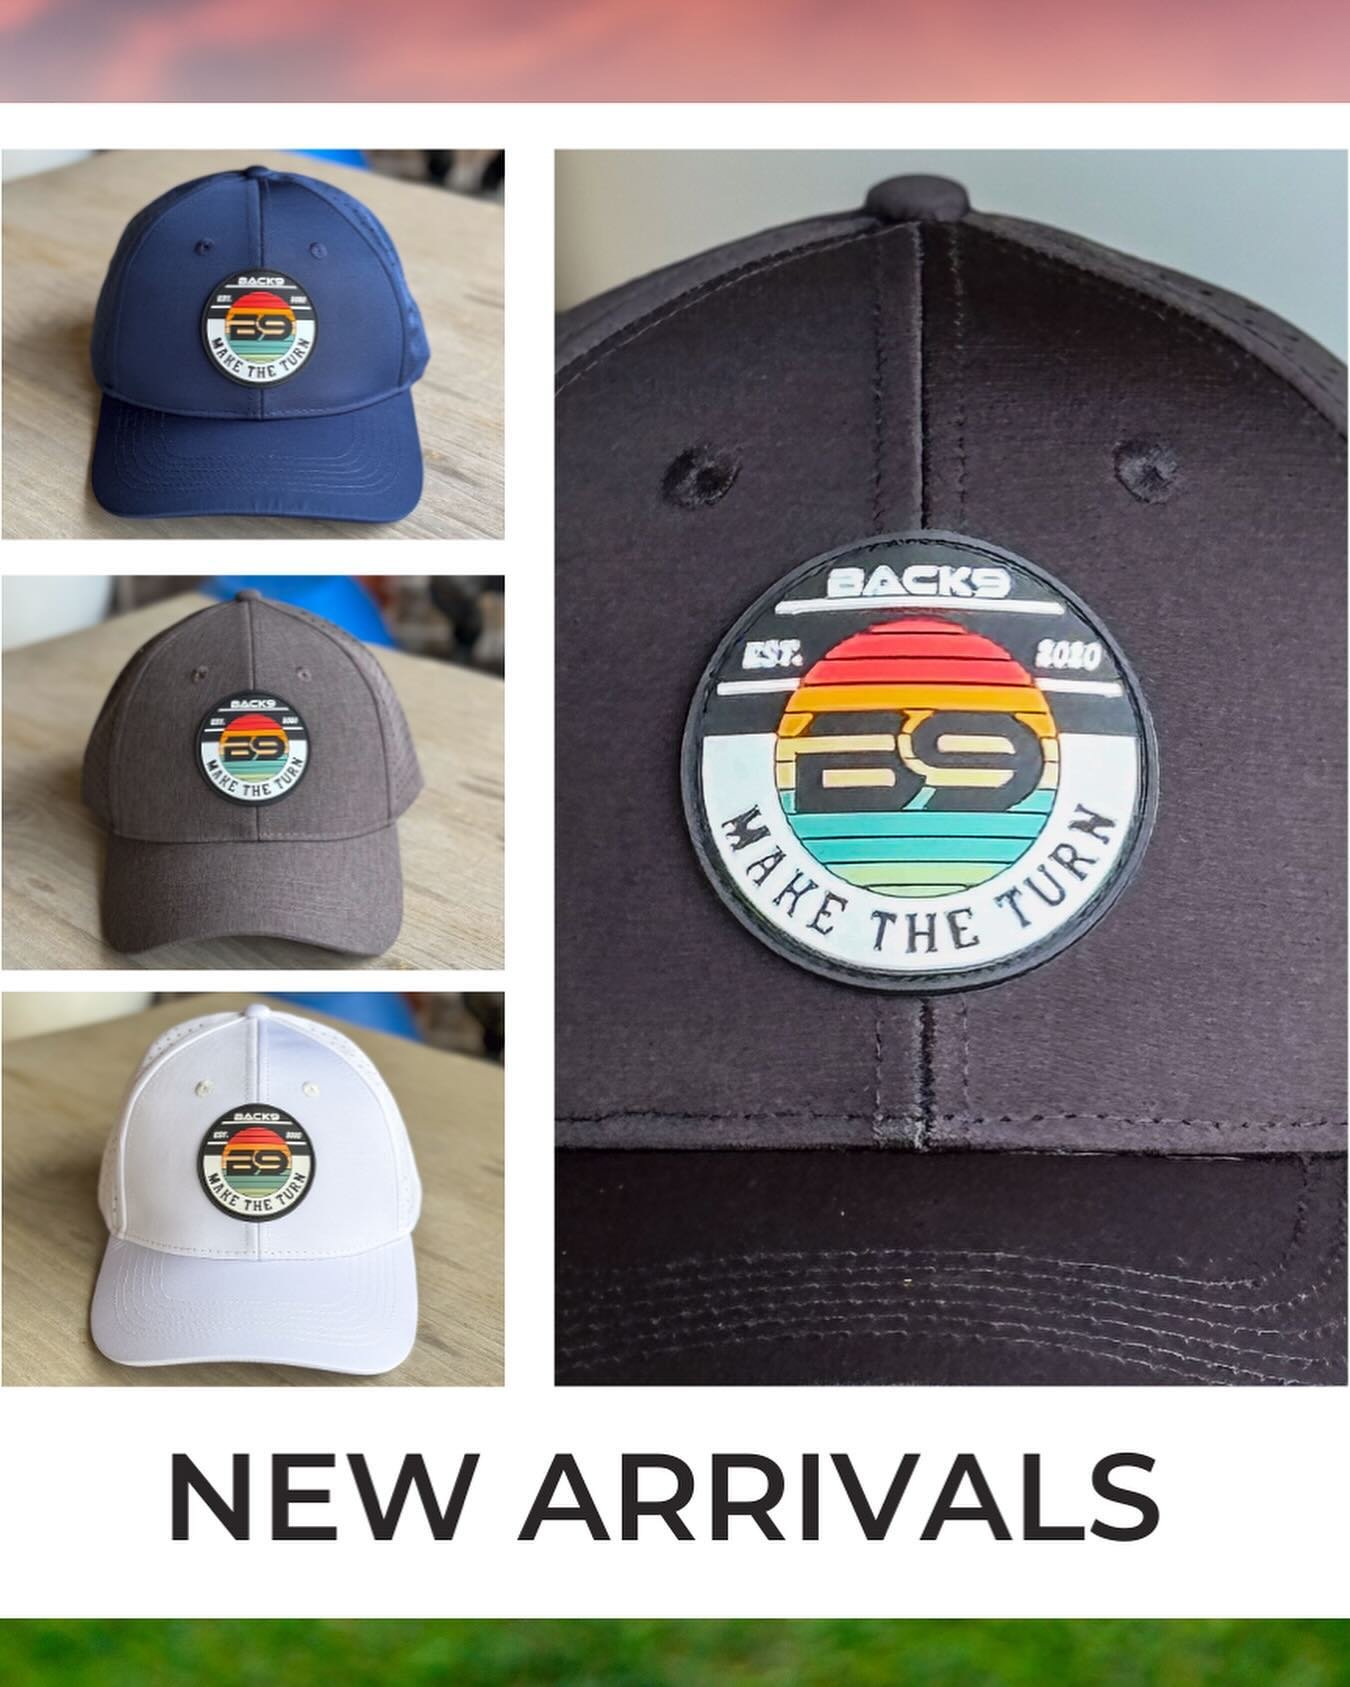 🌅⛳️ **NEW DROP ALERT!** ⛳️🌅

Meet the latest must-have for your golf wardrobe: Our *Make The Turn Sunset Back 9 Golf Hat*! 🧢🔥 Designed for the golfer who loves to stand out, this hat combines sleek style with top-notch functionality.

Crafted fro